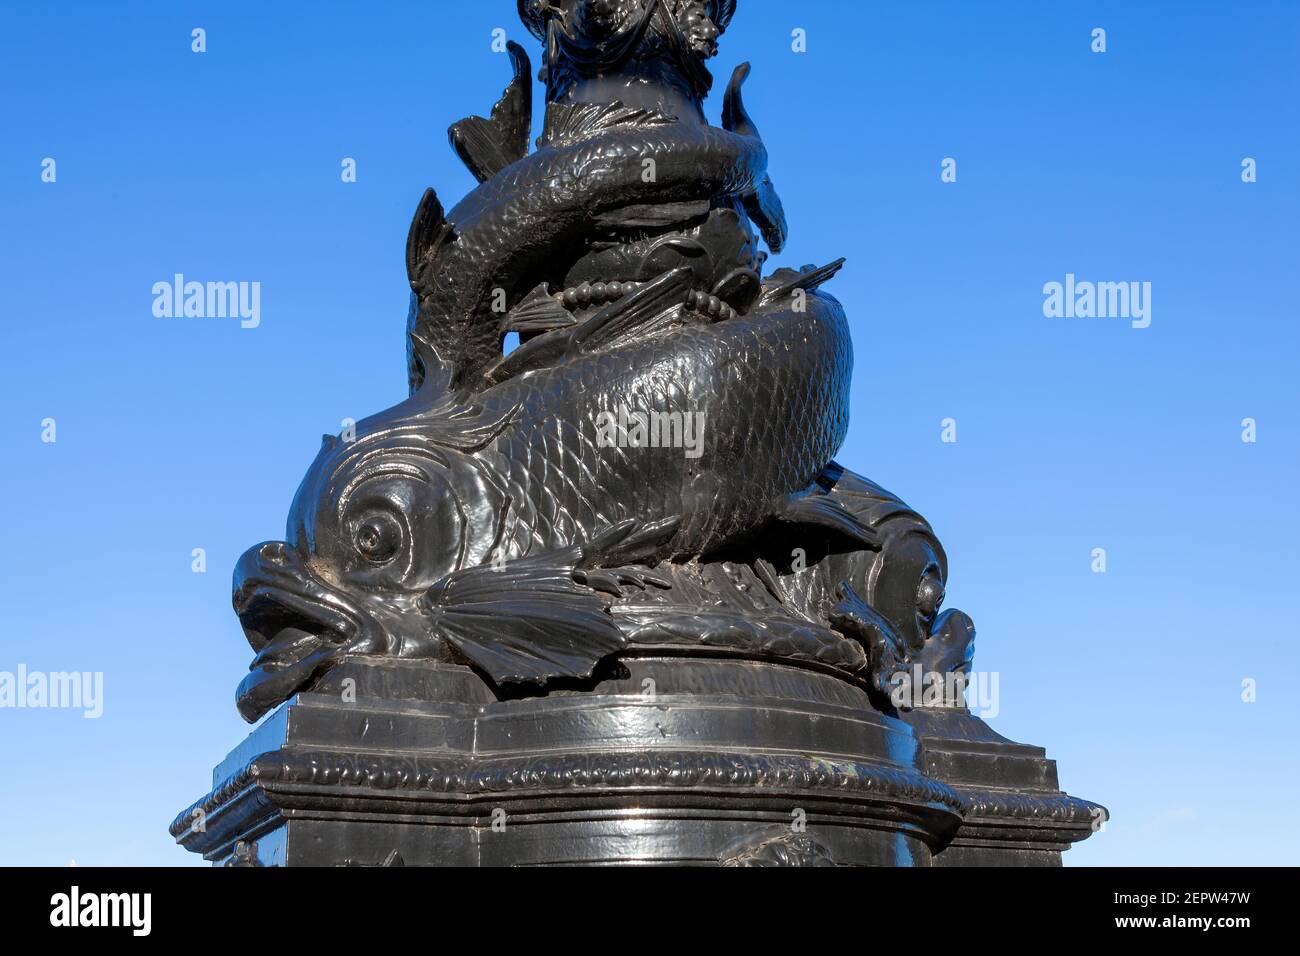 Dolphin lamp standard sculpture statue street furniture lampost on the Embankment of the River Thames which were erected in 1870 and are a popular tou Stock Photo